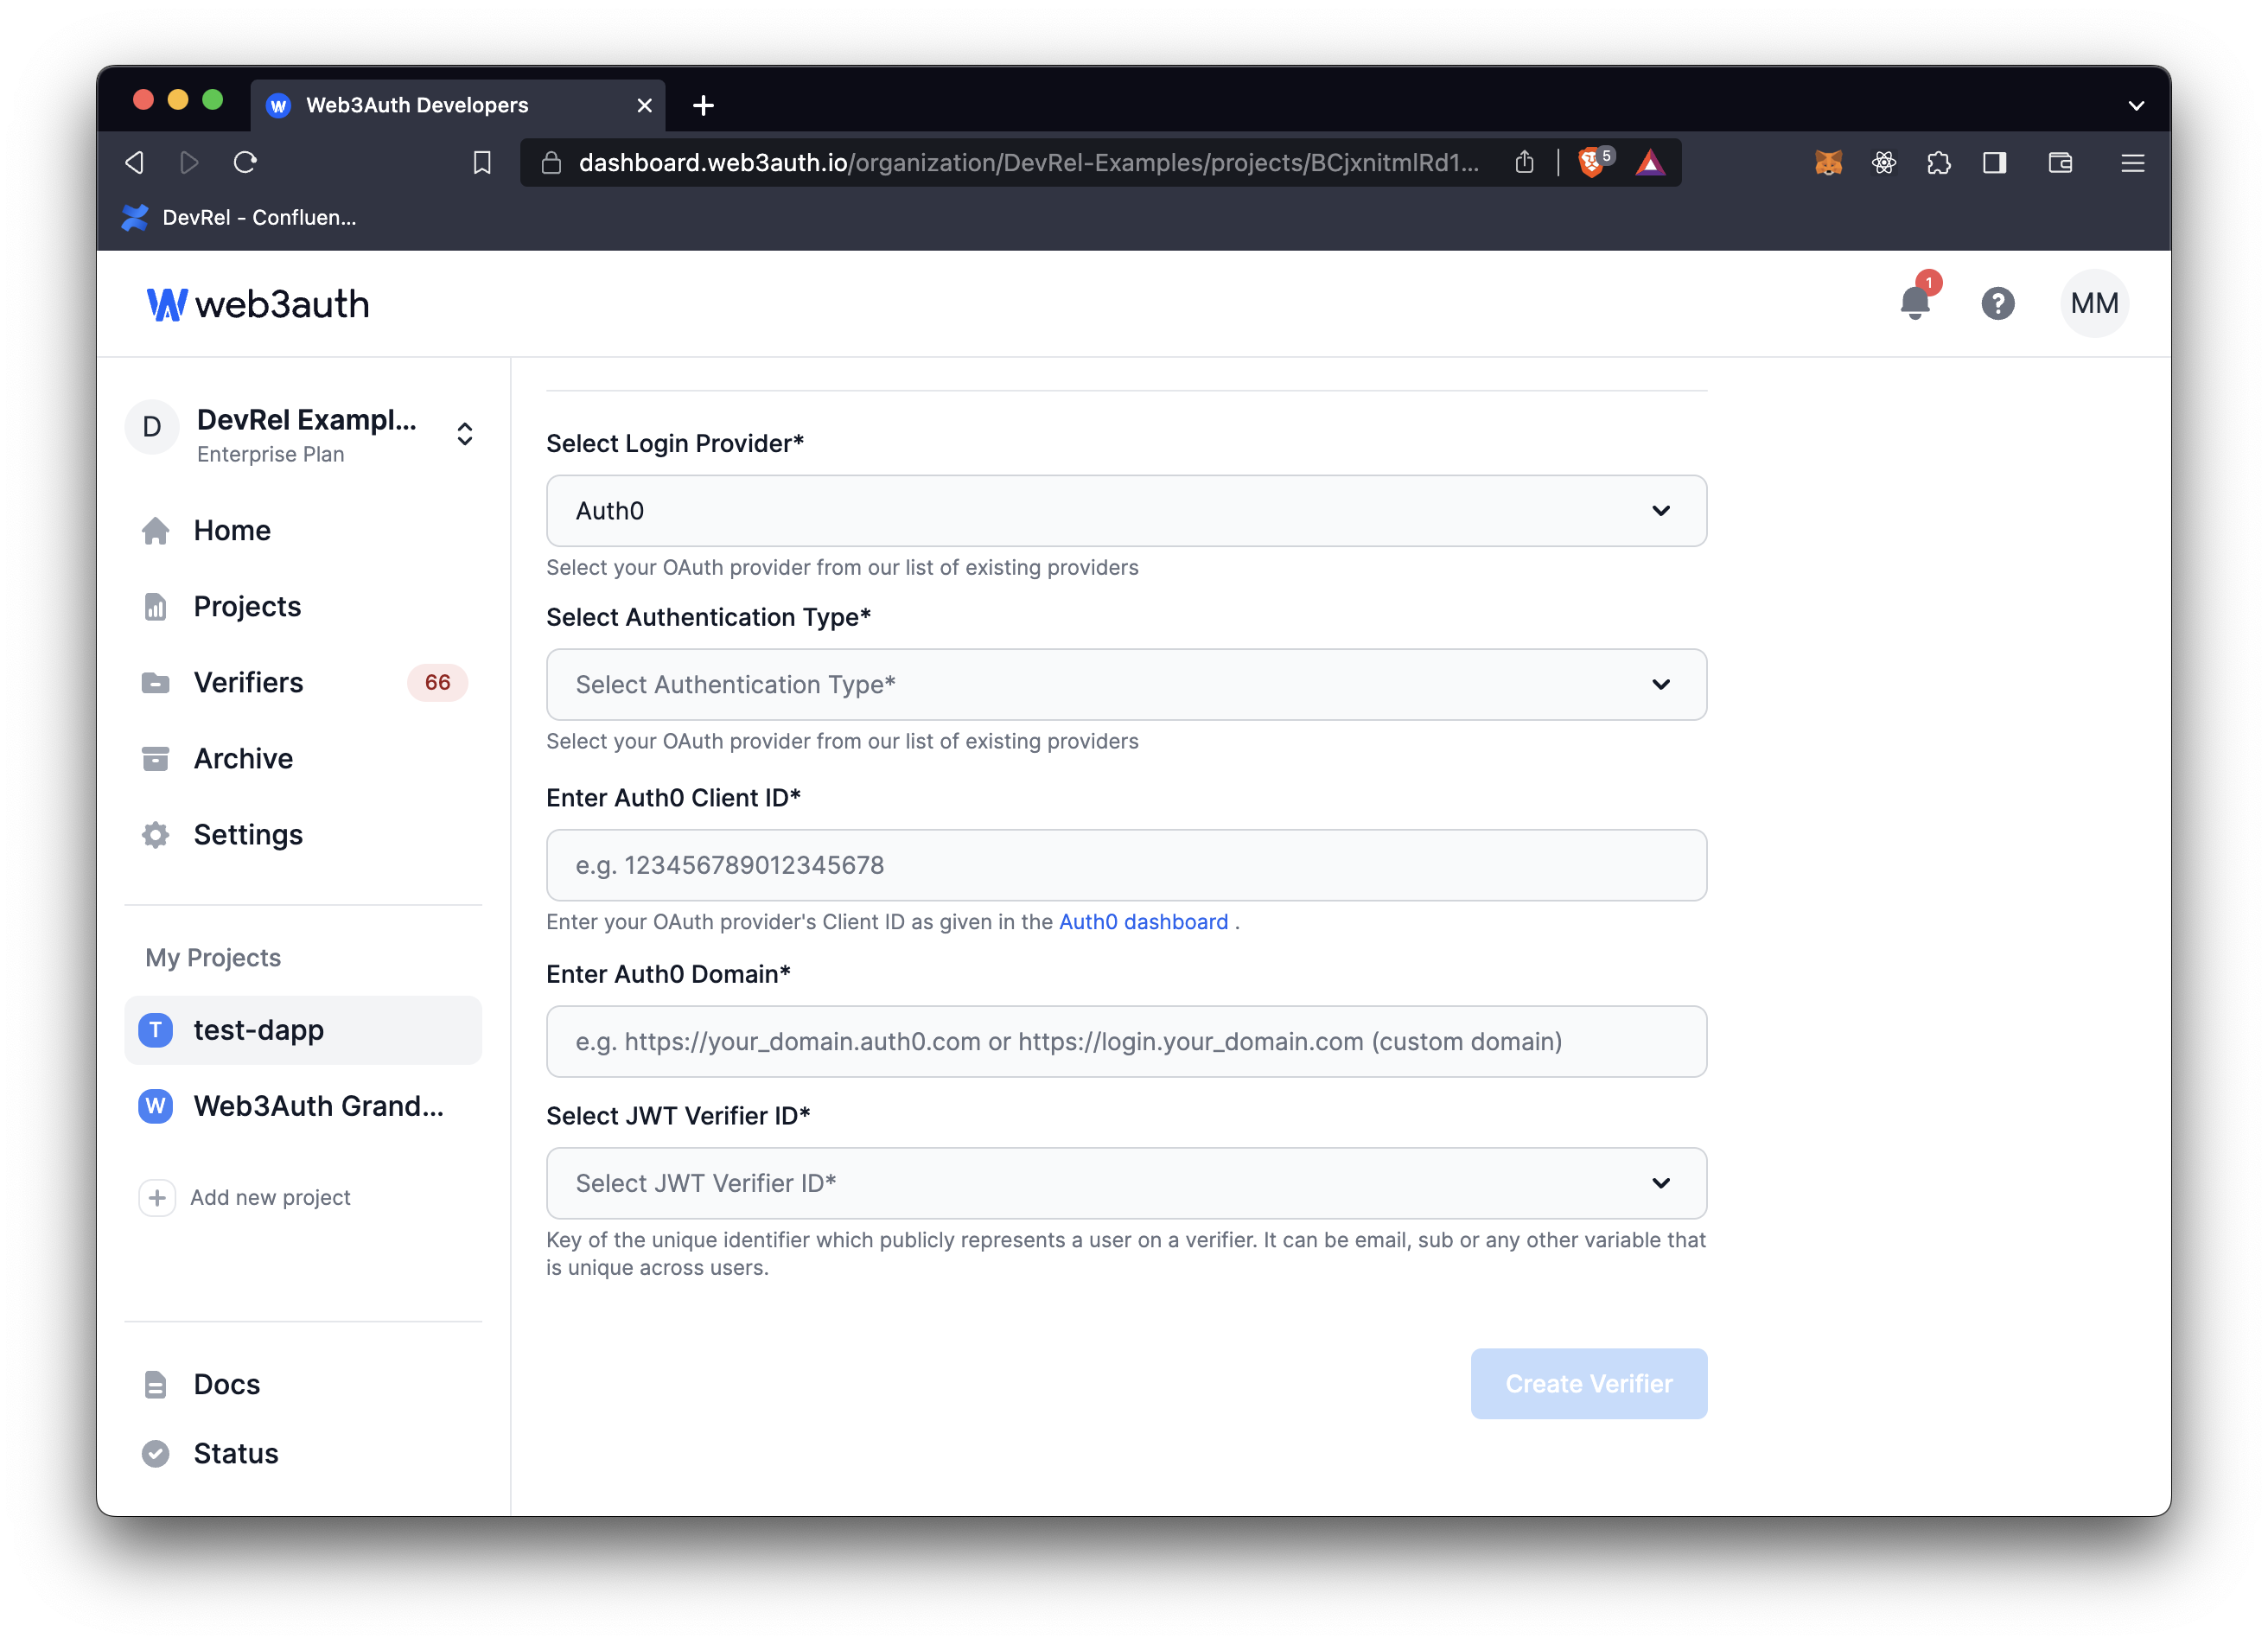 Discord - Auth0 Client ID and Auth0 Domain on Web3Auth Dashboard